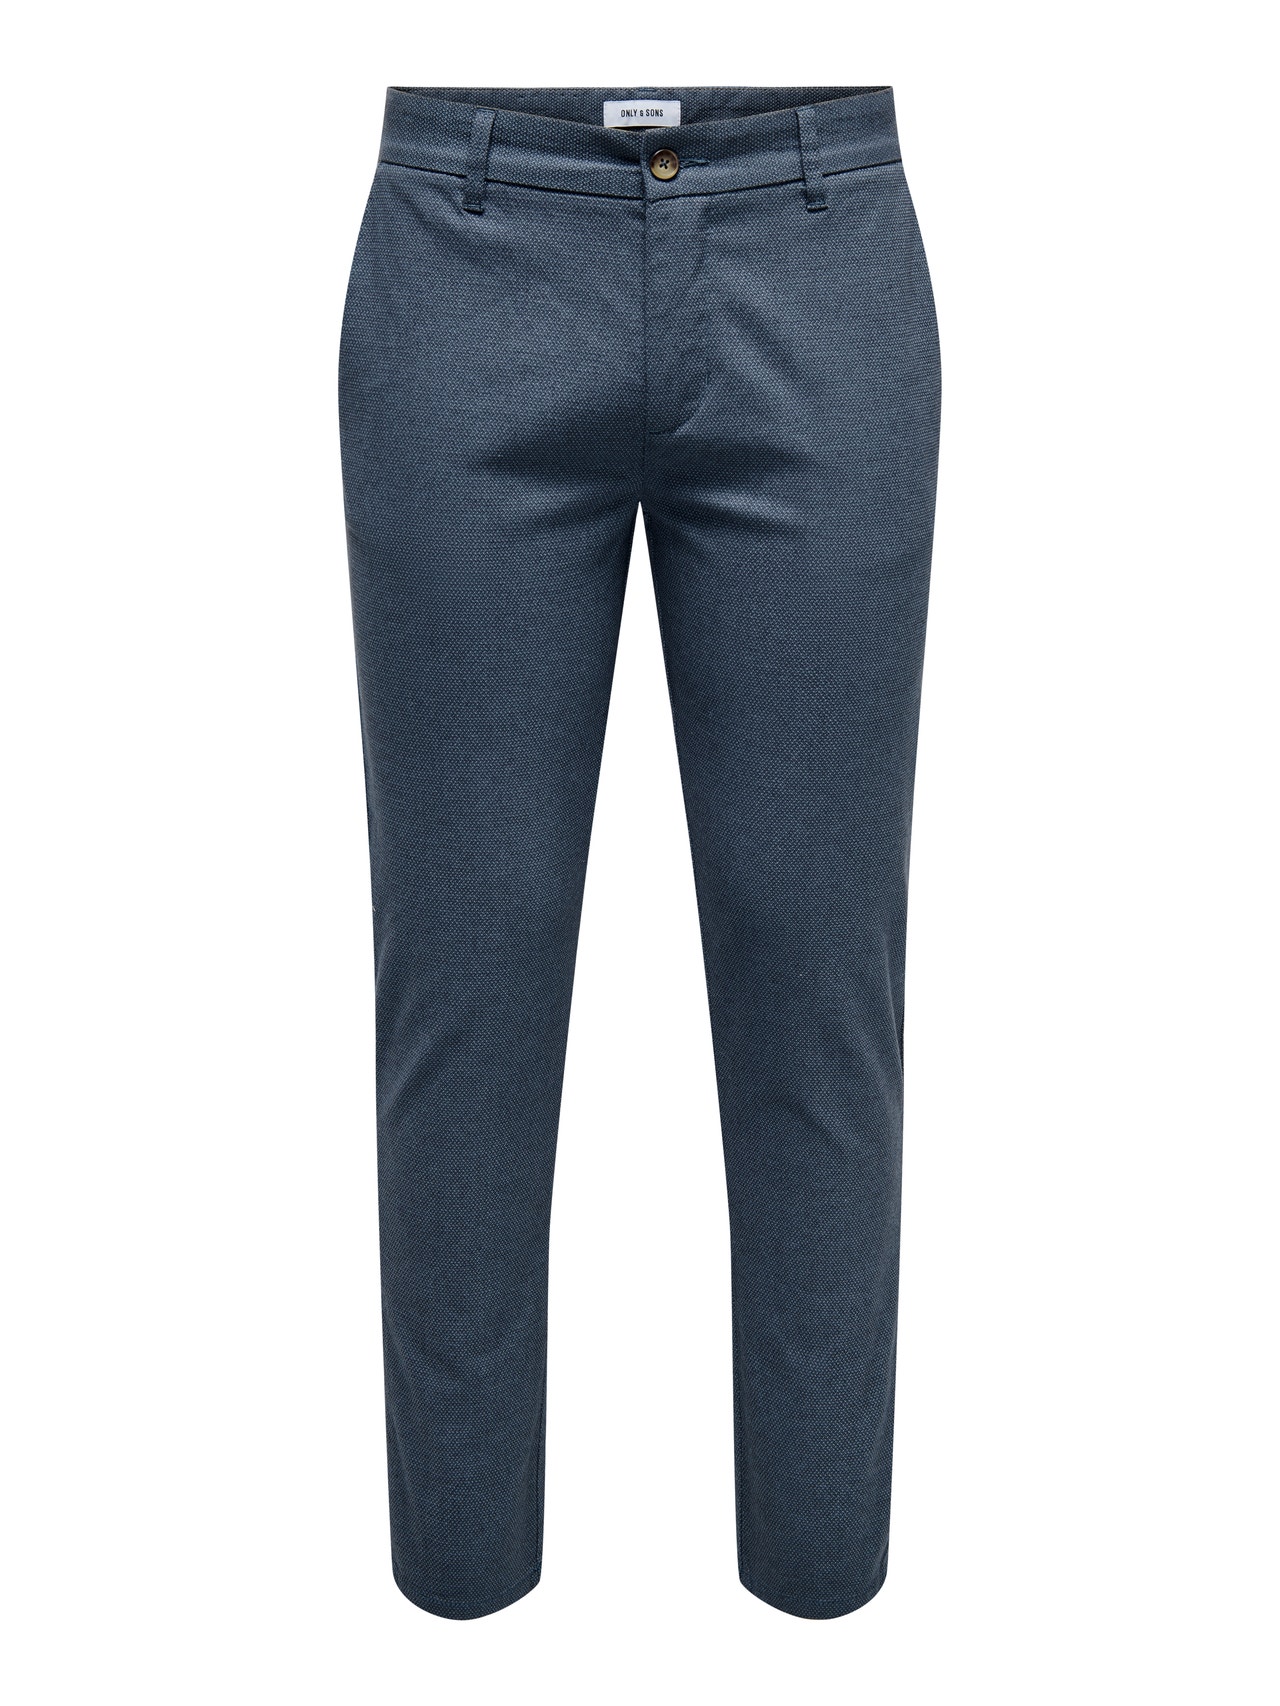 ONLY & SONS Slim Fit Trousers -Bering Sea - 22028132